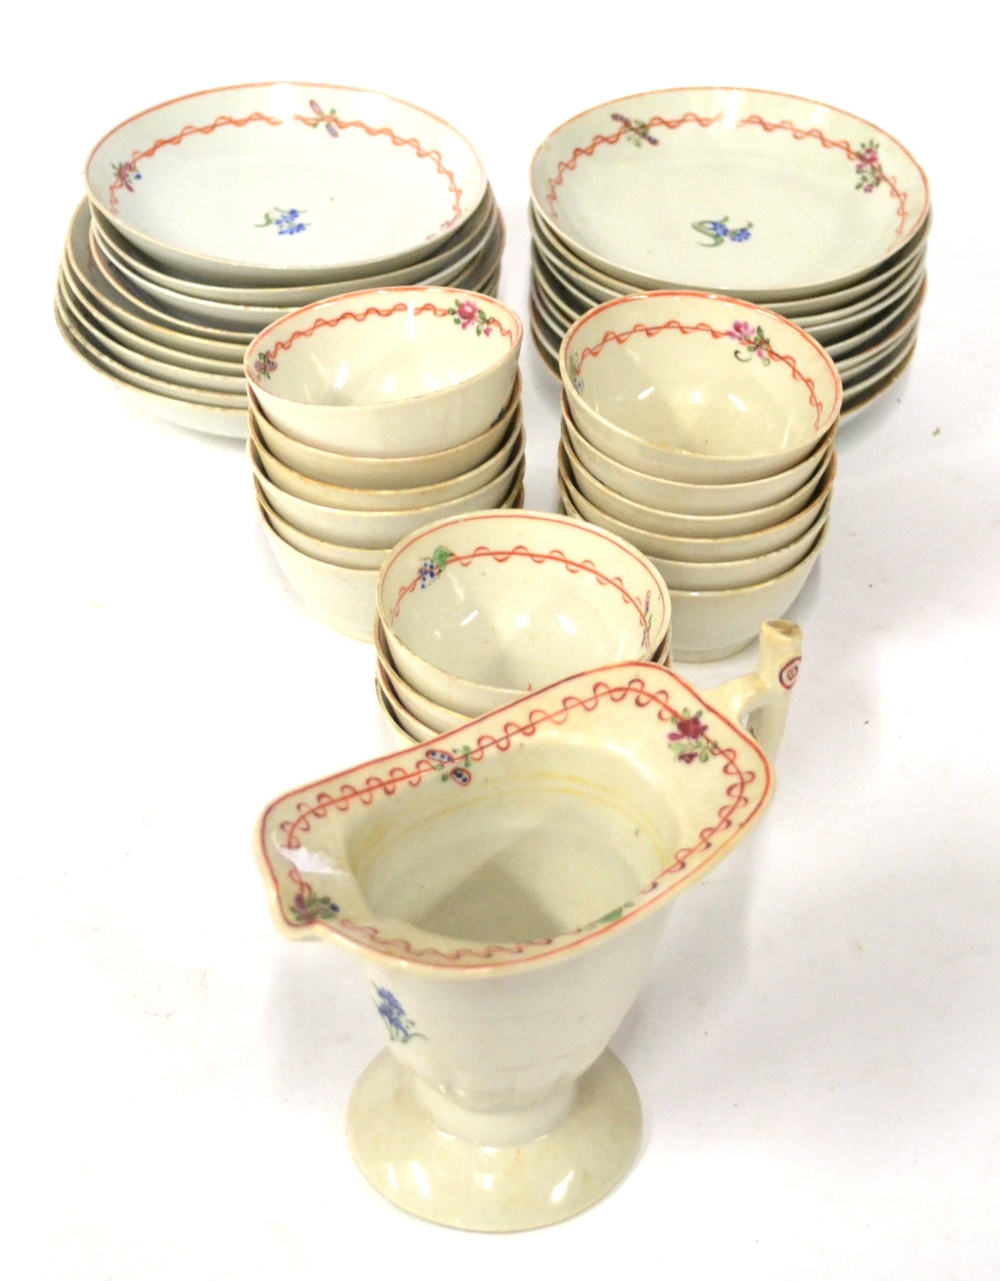 A Chinese Porcelain Tea Service, circa 1790, painted with forget-me-nots with ribbon tied foliate